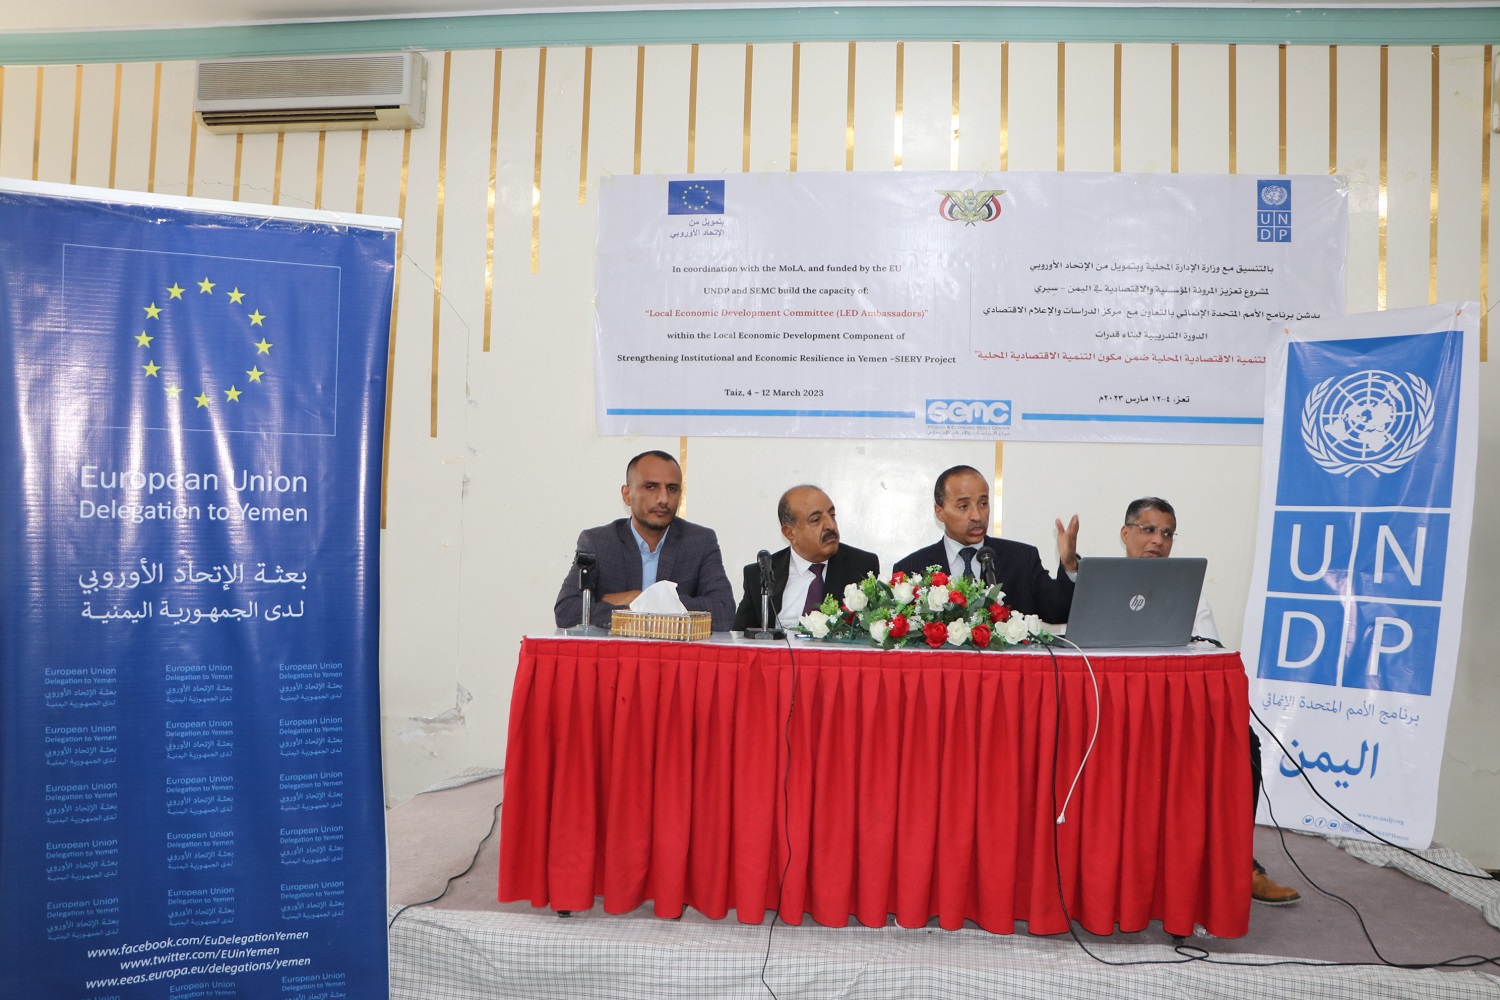 Four training workshops for LED ambassadors in Taiz, Lahj and Hadramout